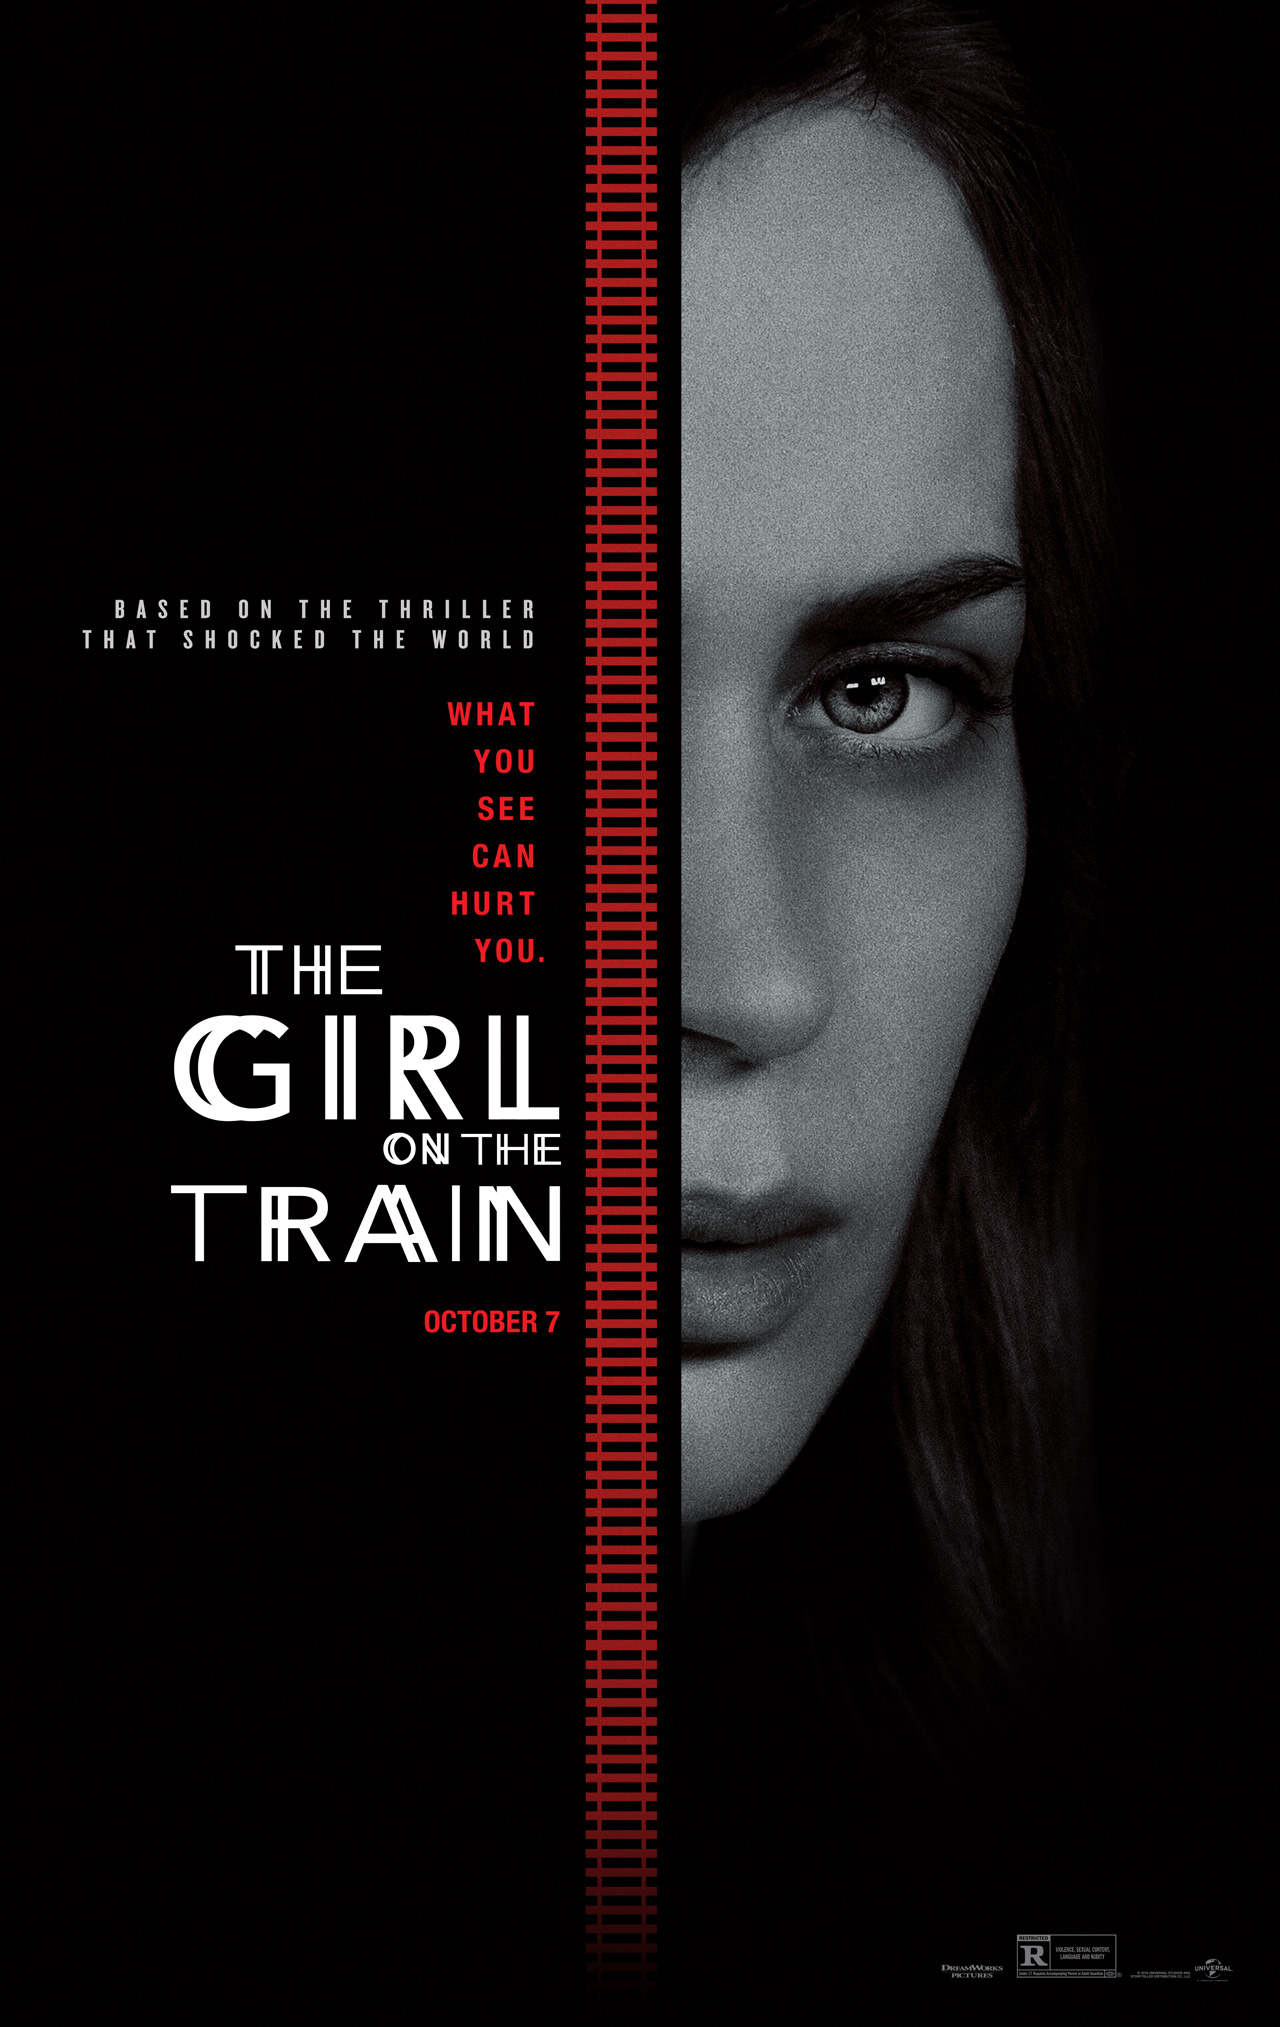 Interview: Tate Taylor, Emily Blunt and the Cast Talk The Girl on the Train